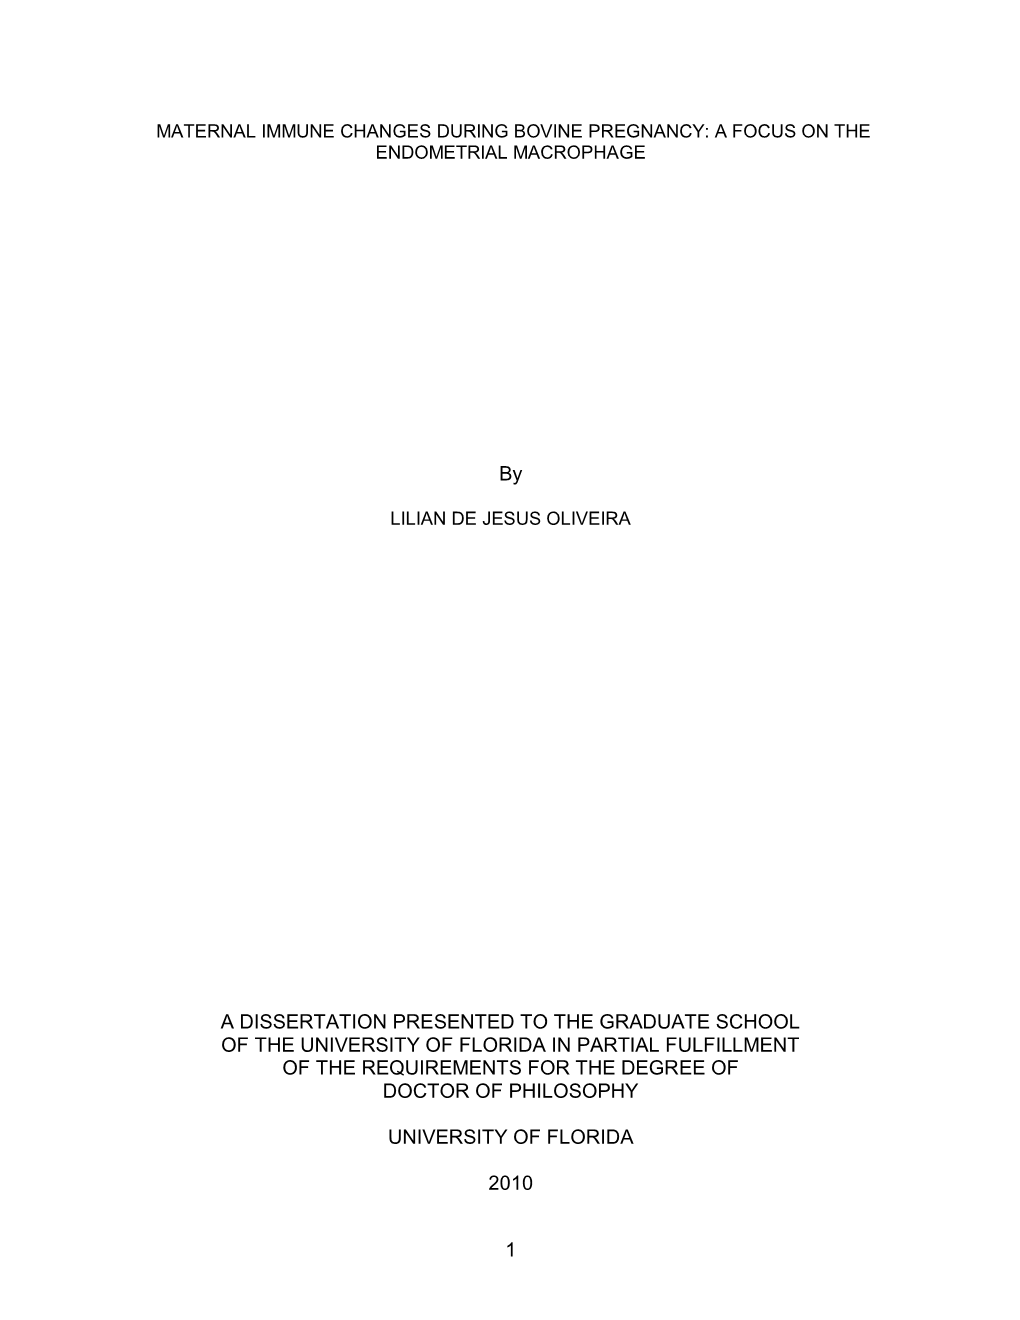 A Dissertation Presented to the Graduate School of the University of Florida in Partial Fulfillment of the Requirements for the Degree of Doctor of Philosophy